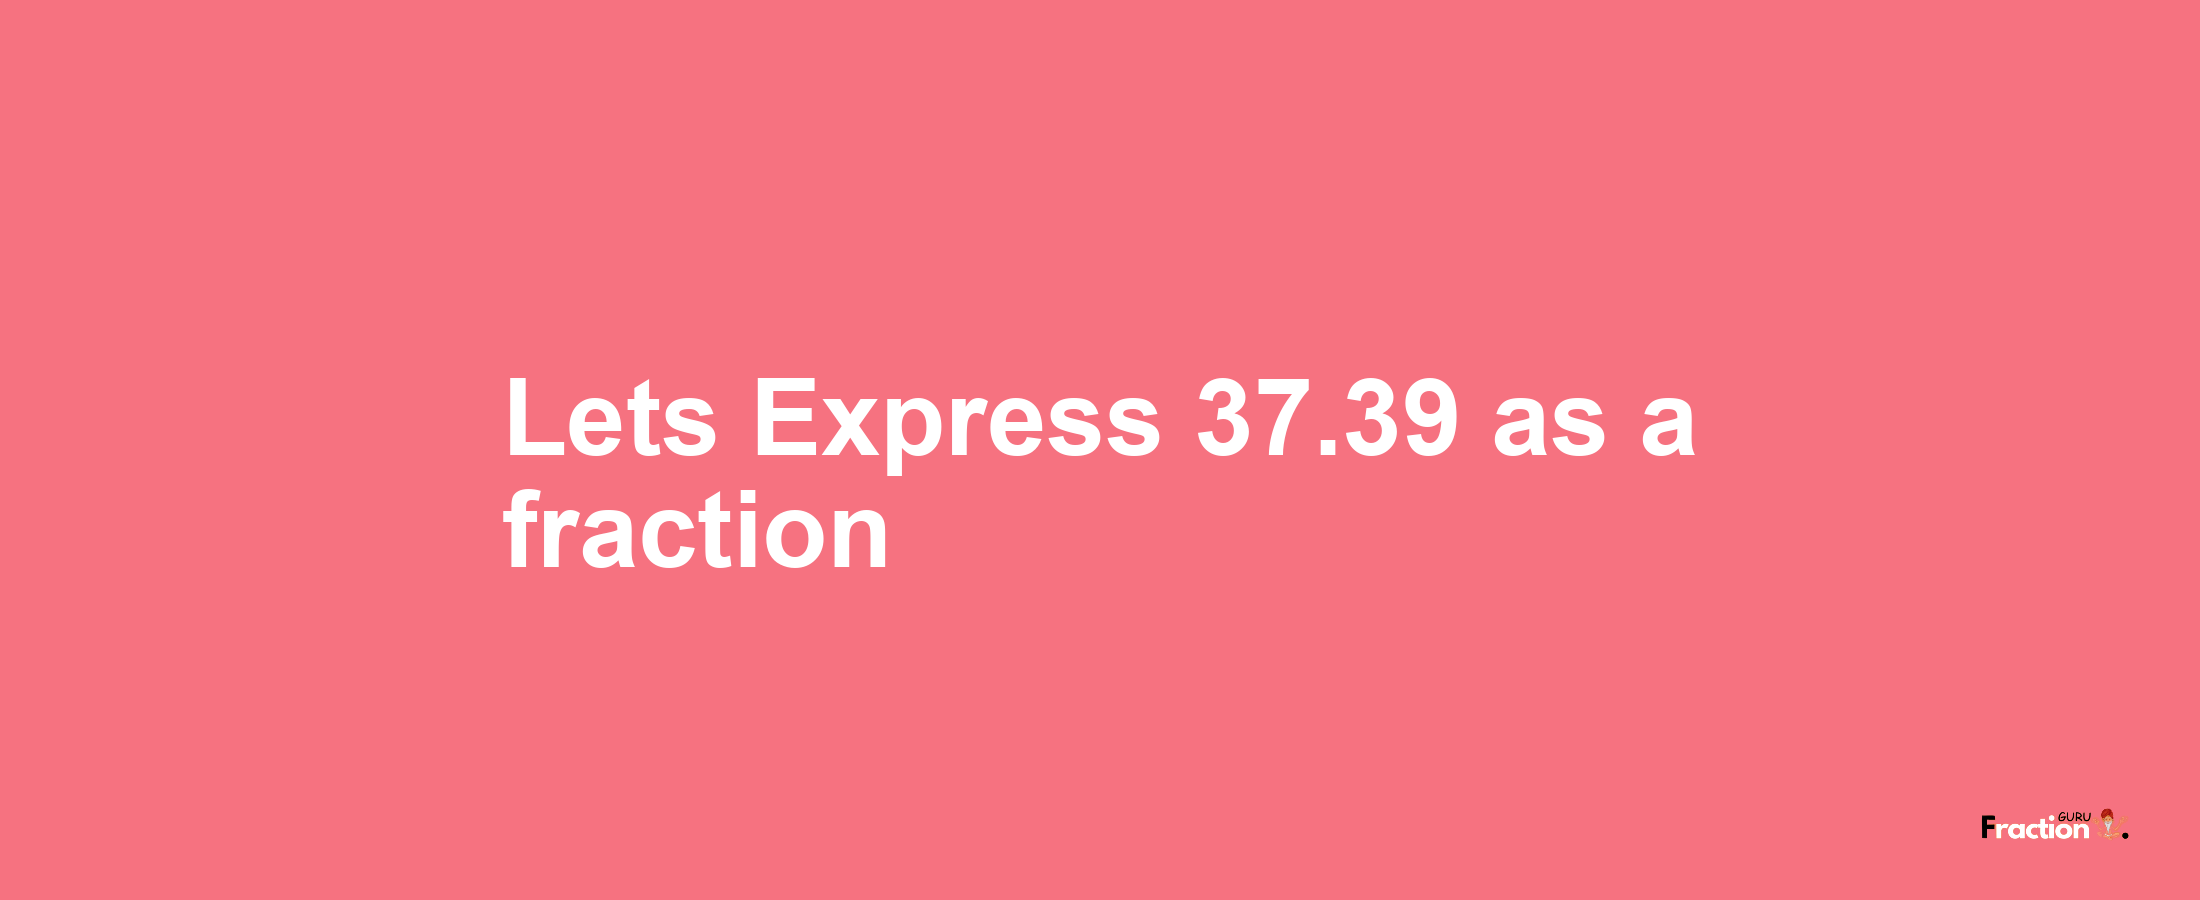 Lets Express 37.39 as afraction